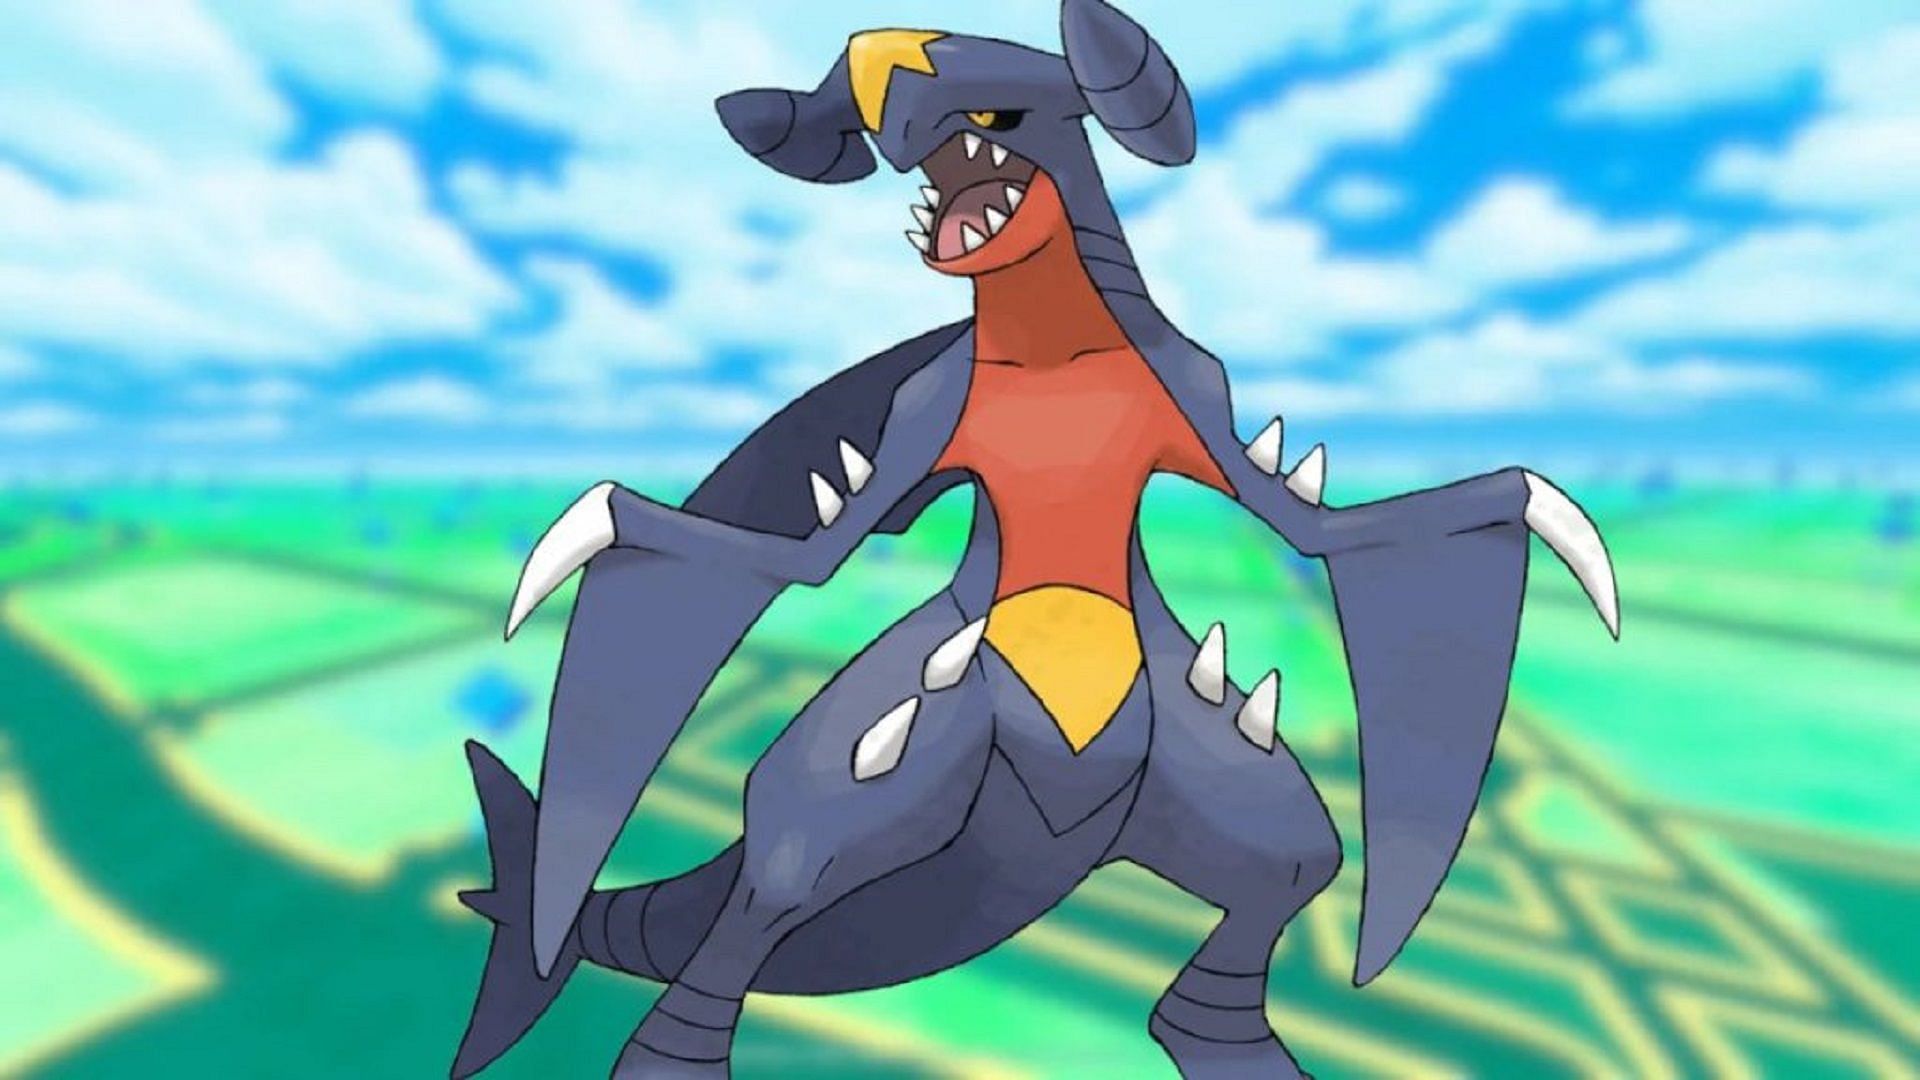 Garchomp has remained a top Ground-type contender (Image via Niantic)